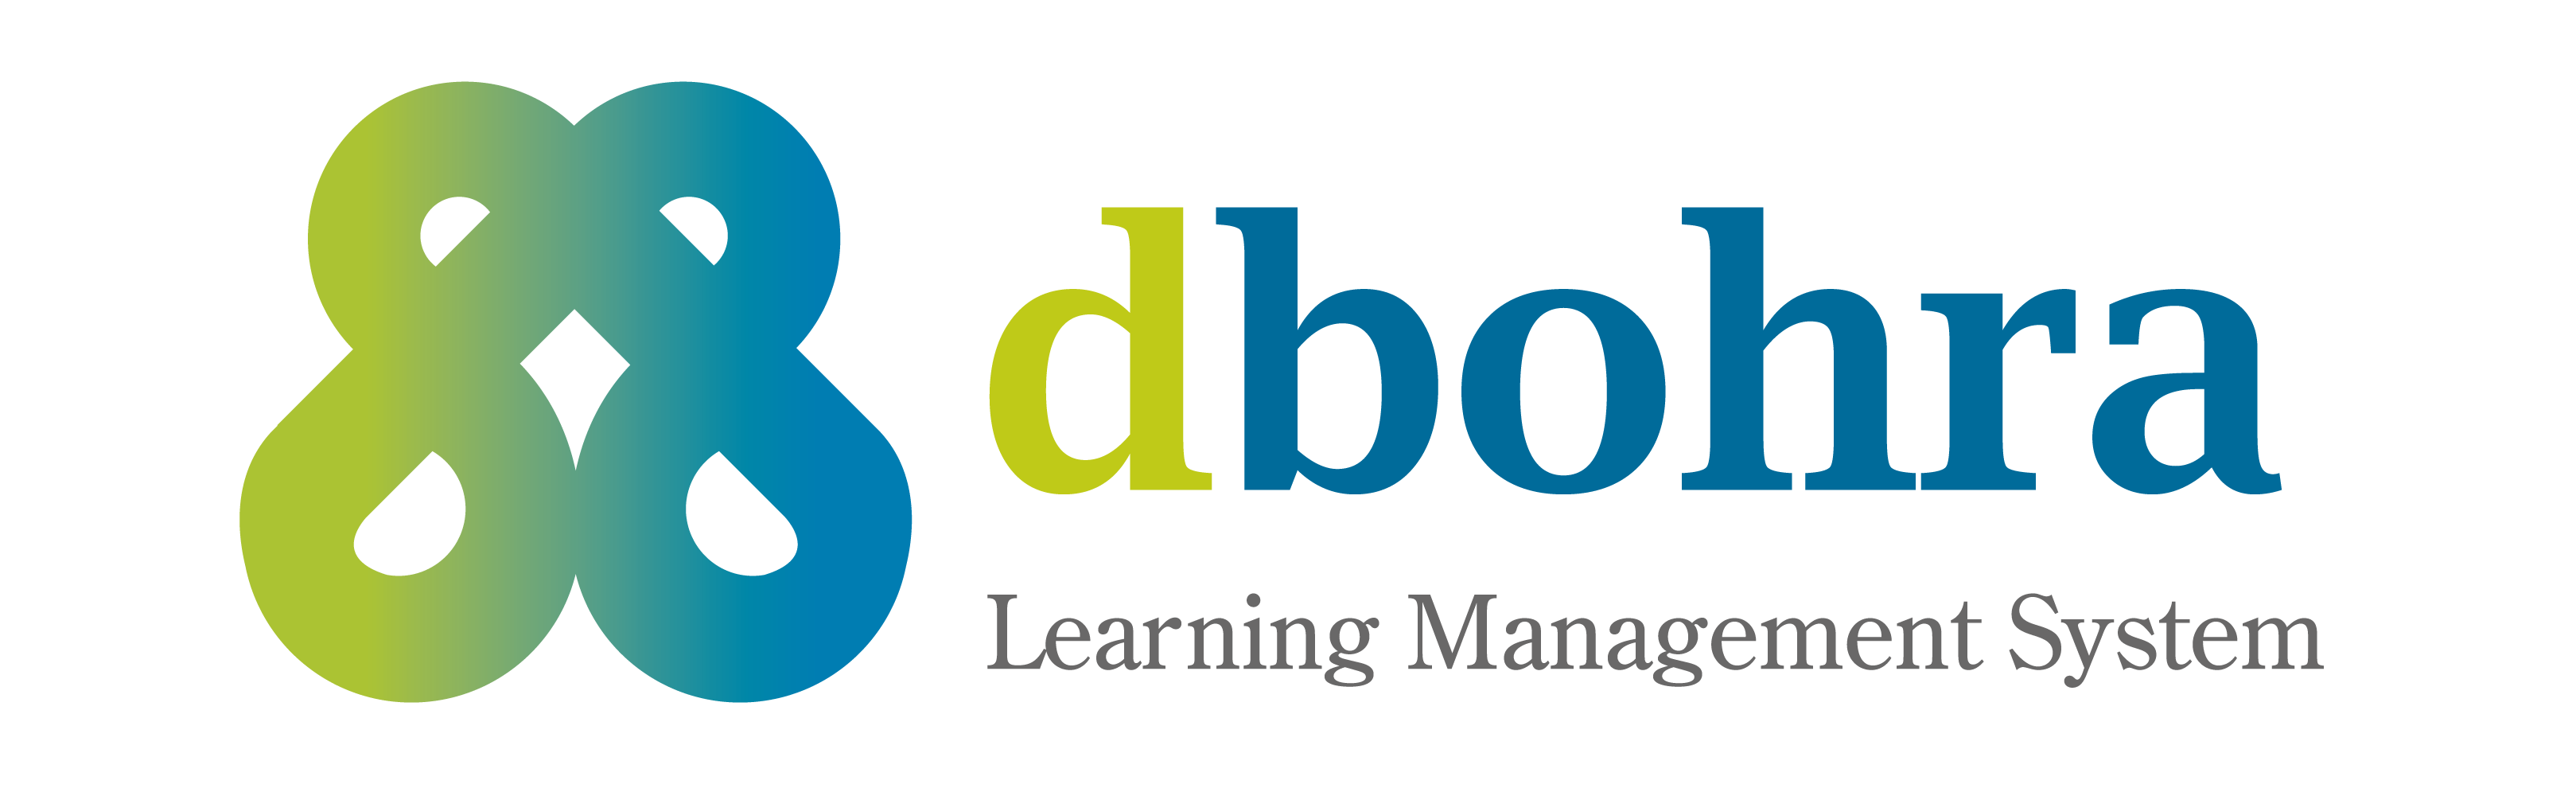 DBohra Learning Management System